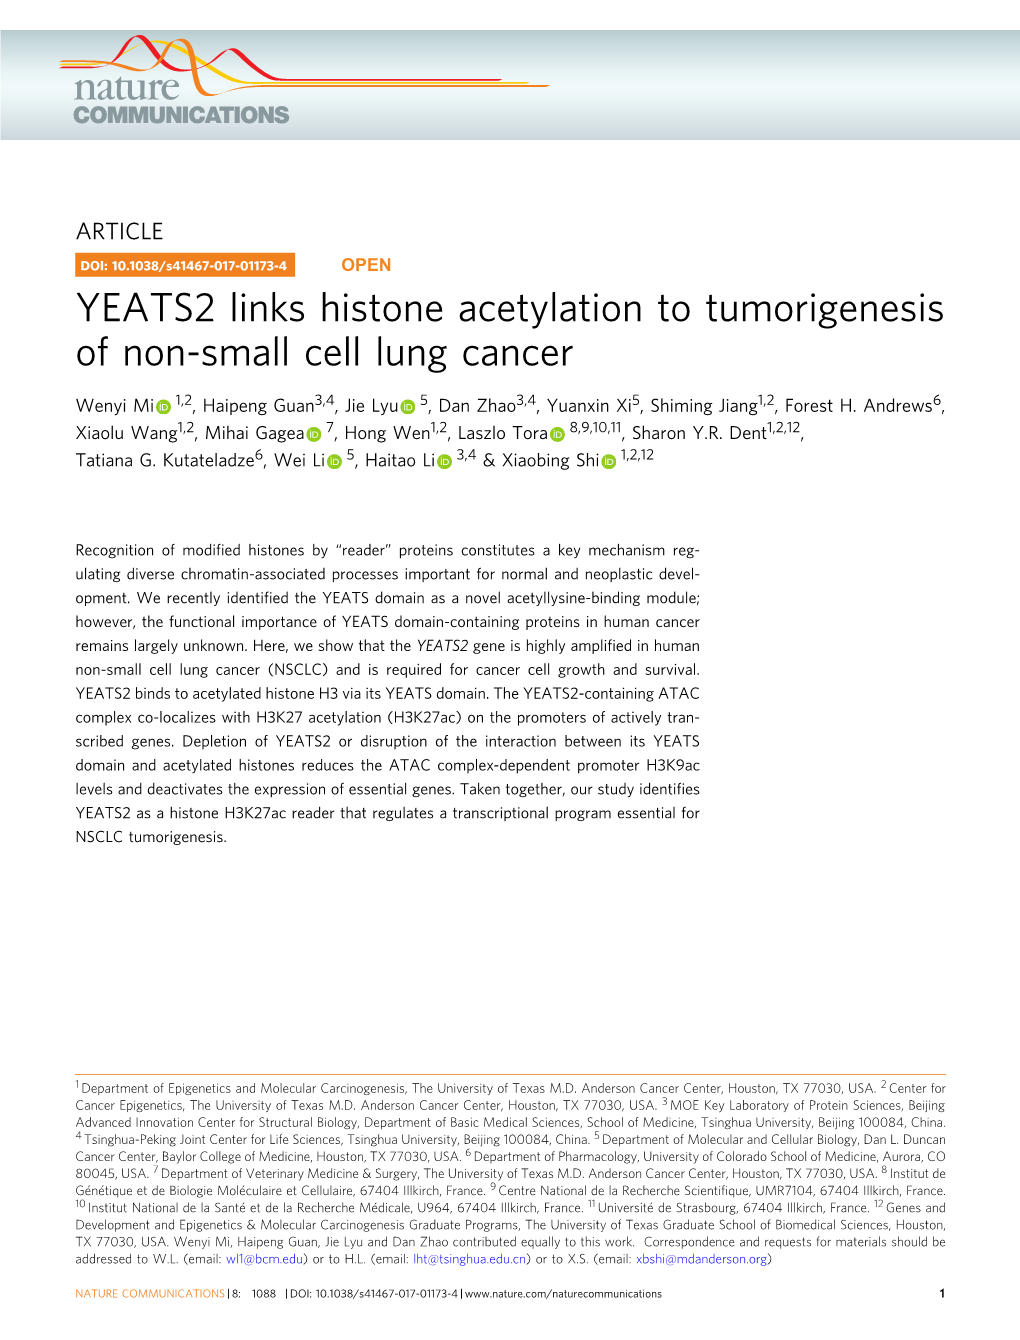 YEATS2 Links Histone Acetylation to Tumorigenesis of Non-Small Cell Lung Cancer